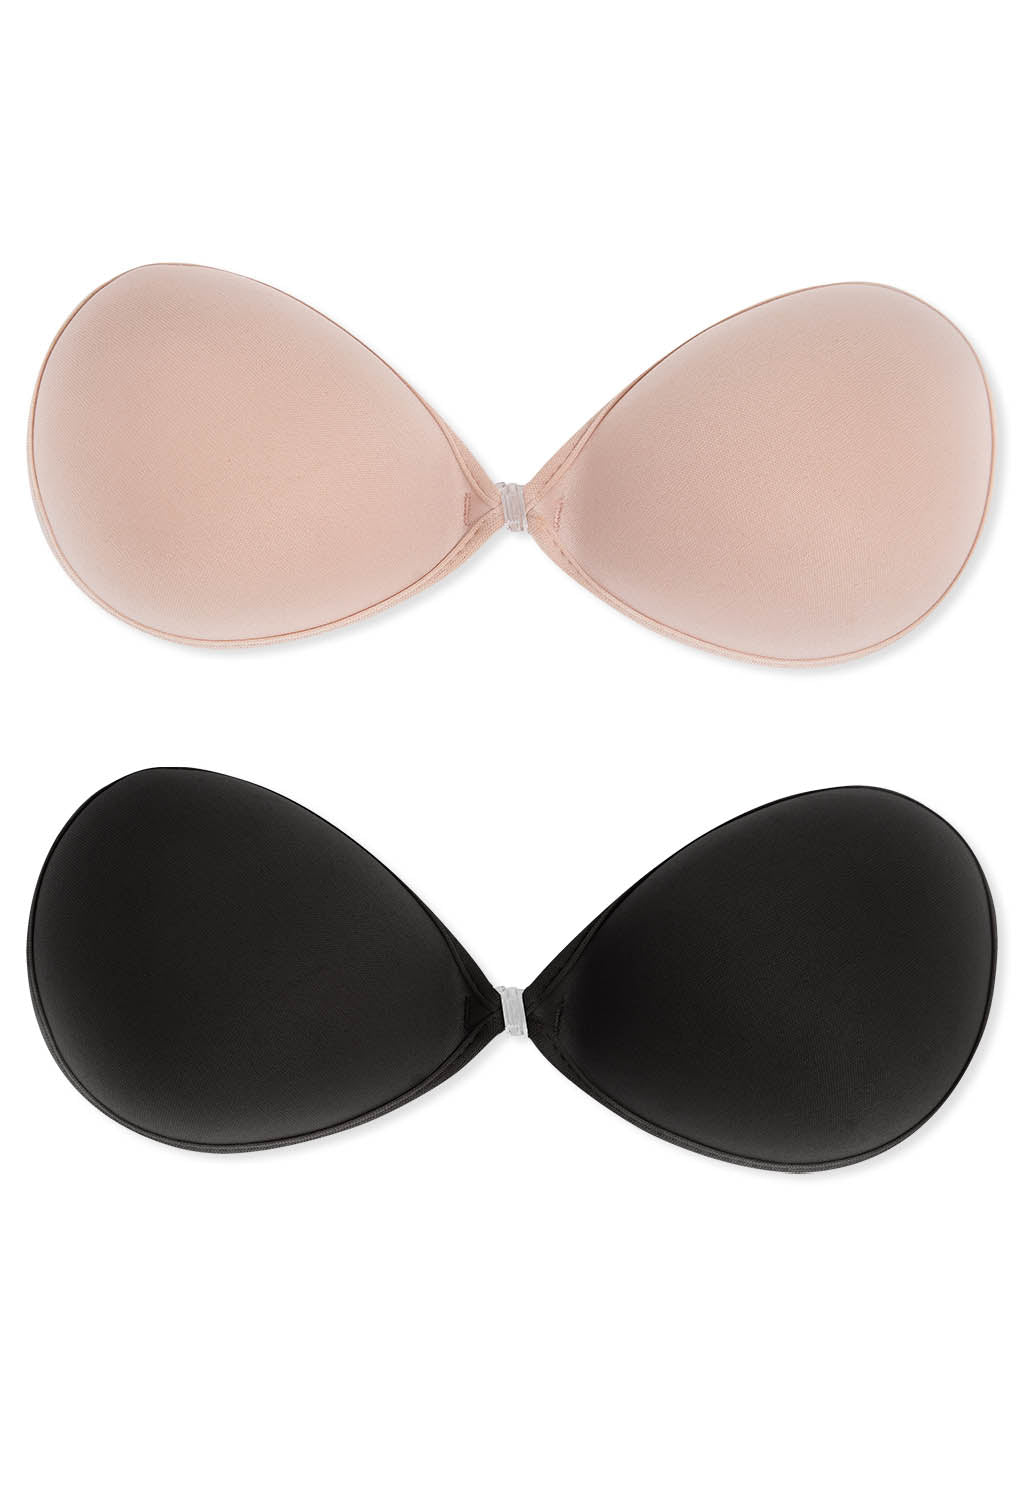 Wholesale silicone bra inserts For All Your Intimate Needs